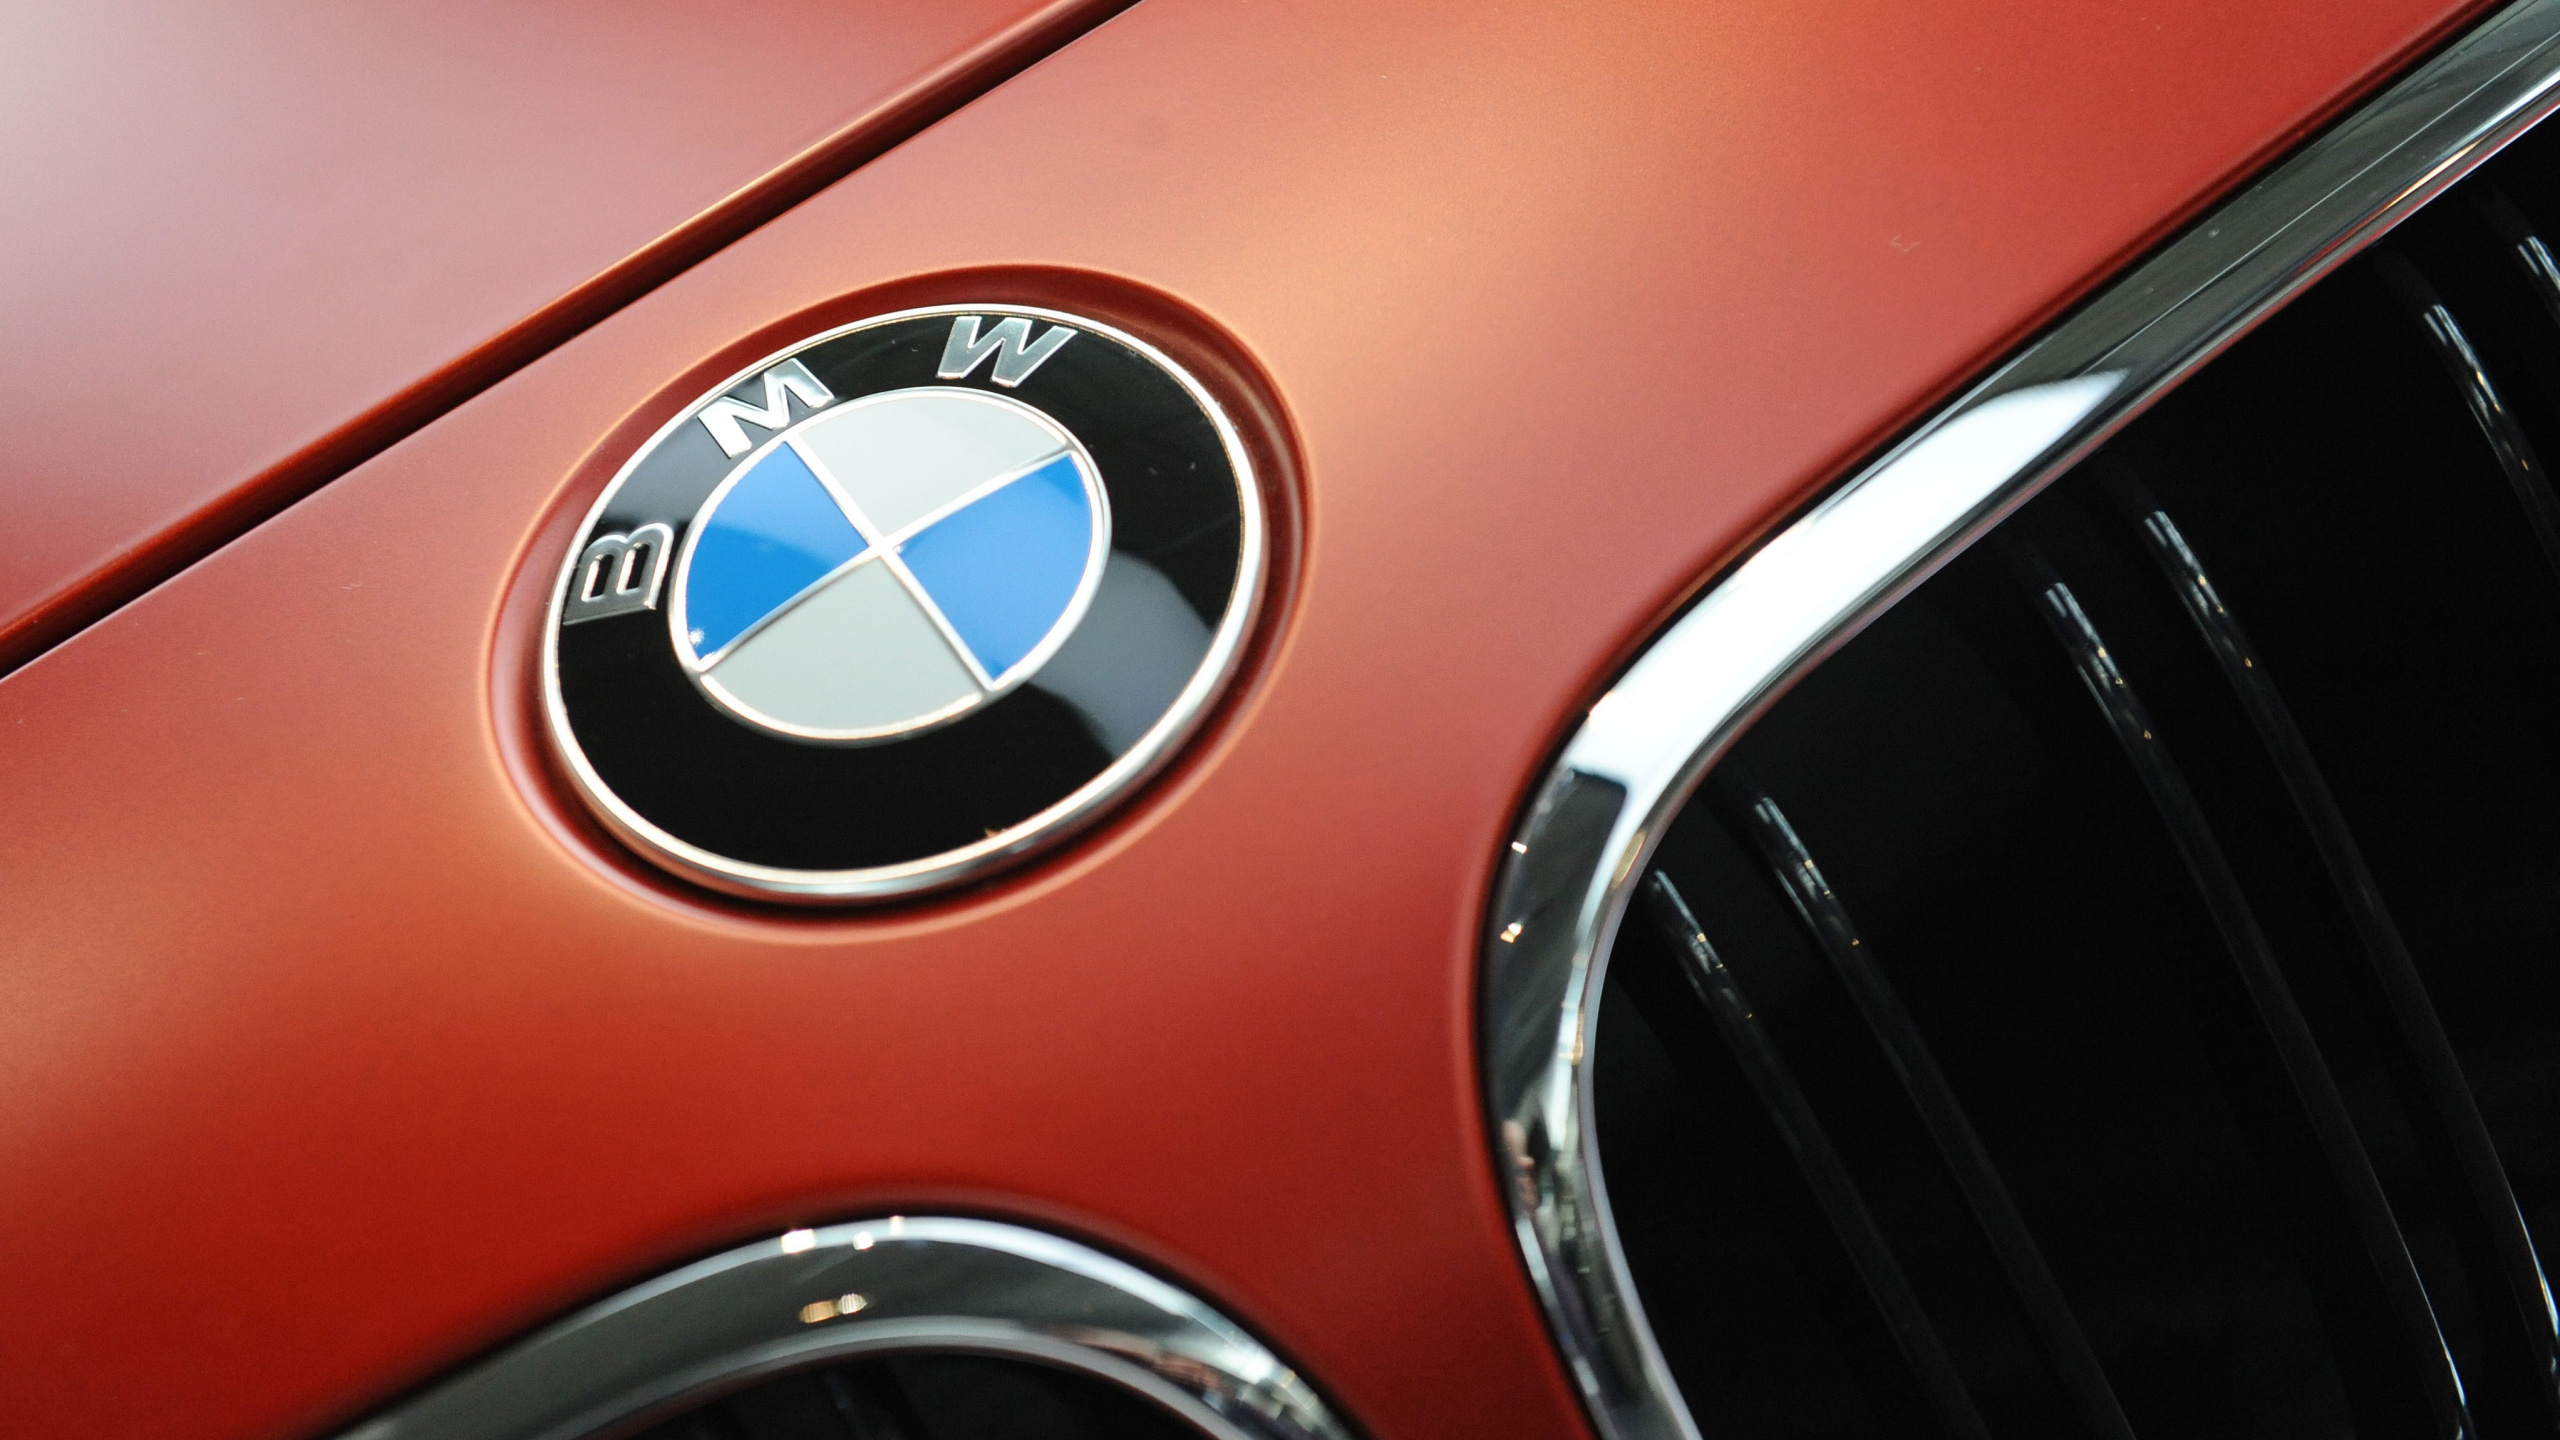 Red and Silver Bmw Car. Wallpaper in 2560x1440 Resolution